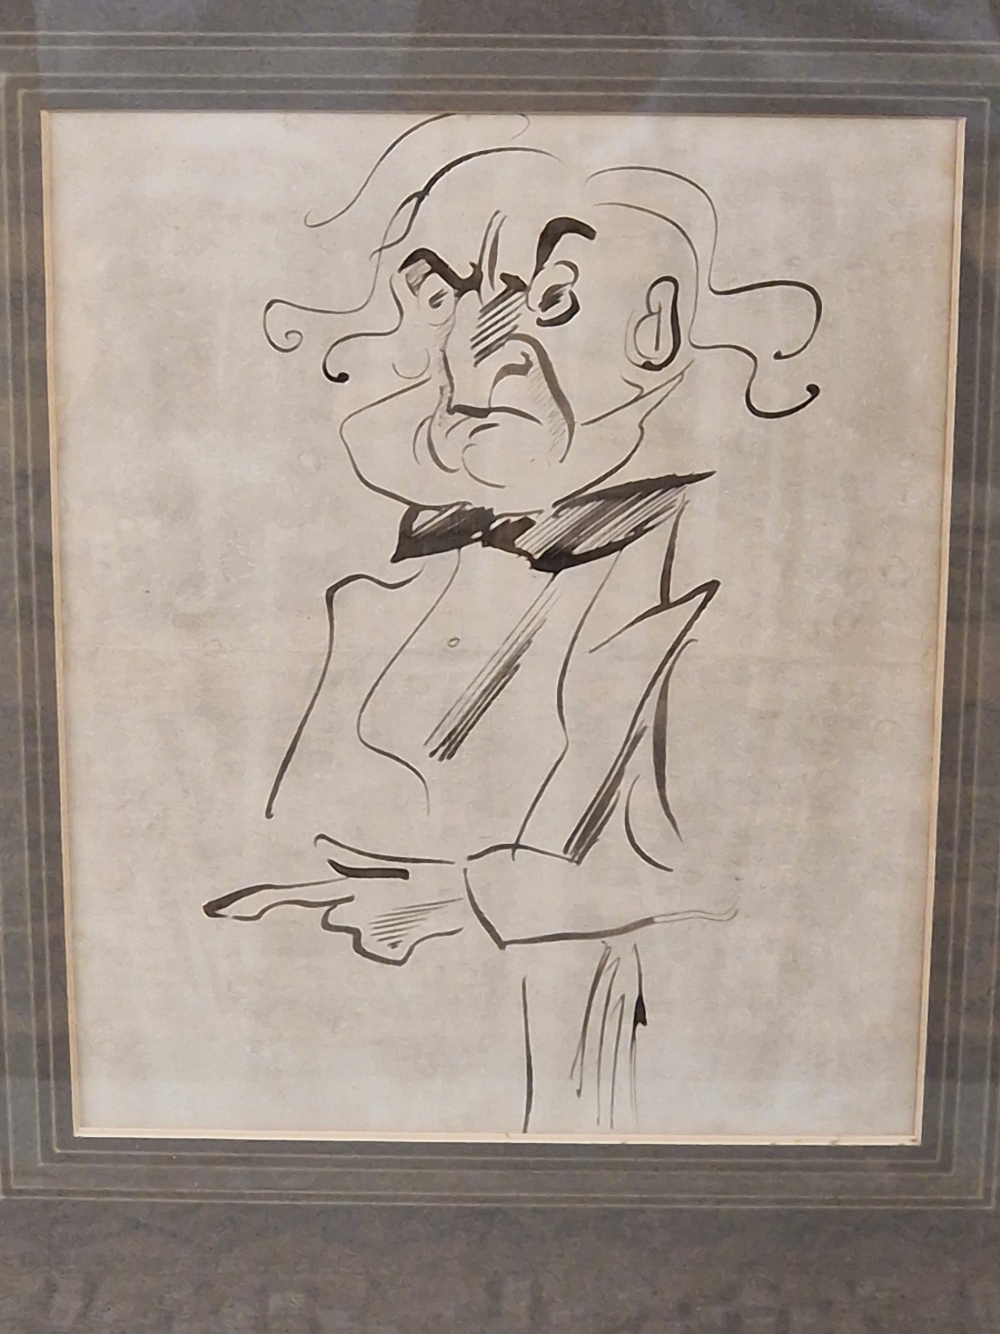 MAX BEERBOHM (1872-1956), A CARTOON PORTRAIT OF WILLIAM GLADSTONE, INK, LABELLED VERSO. 23.5 x - Image 2 of 4